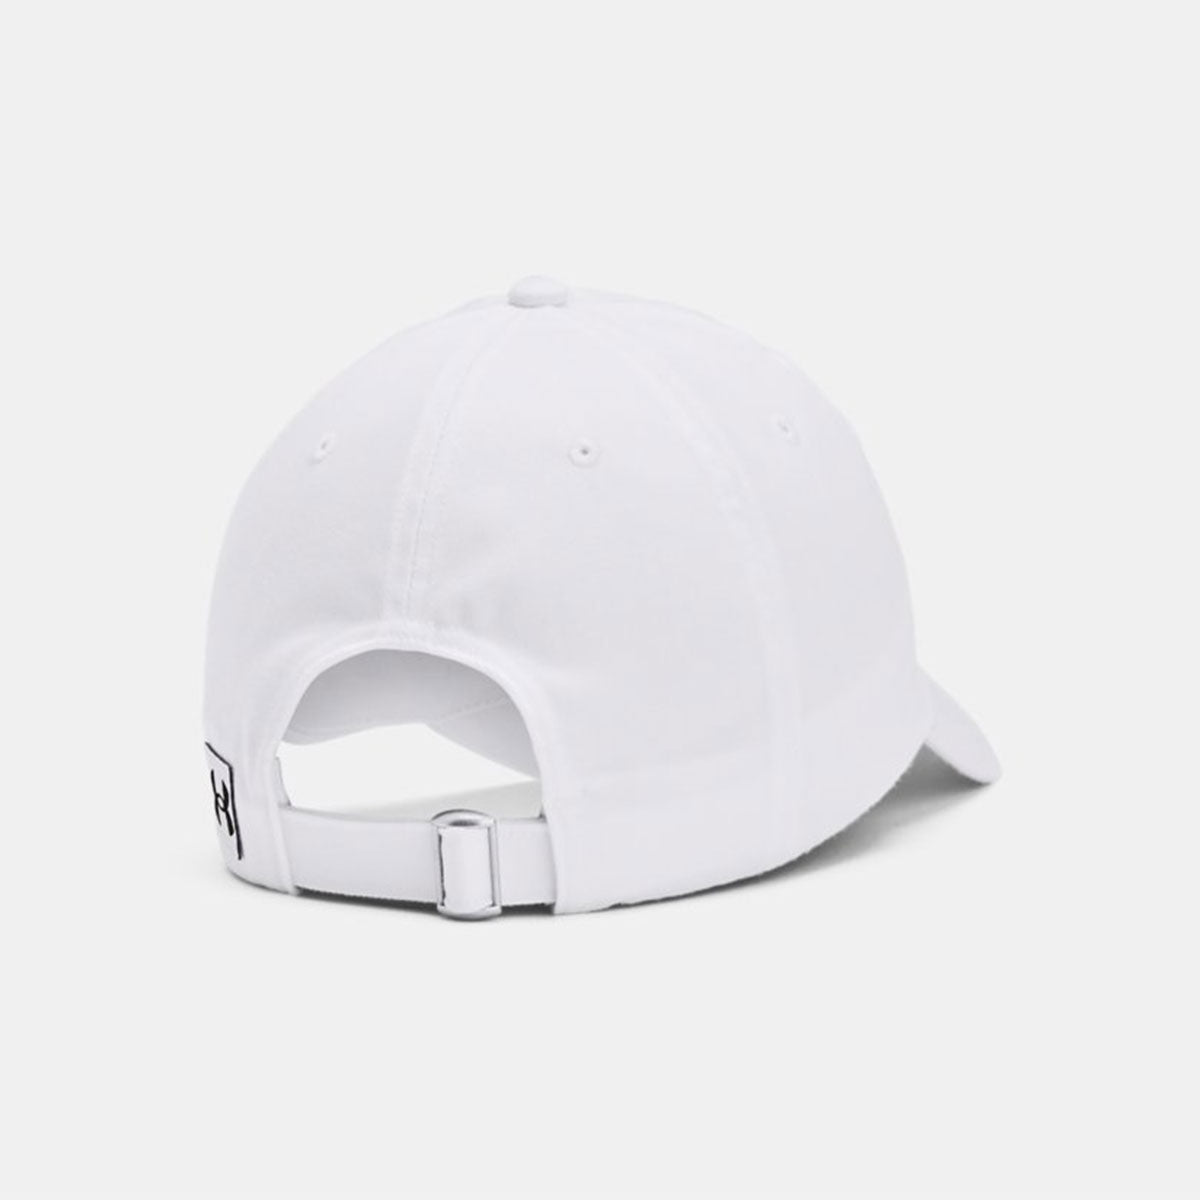 Team Blank Chino Pitch Gray Dad Cap - Under Armour cap